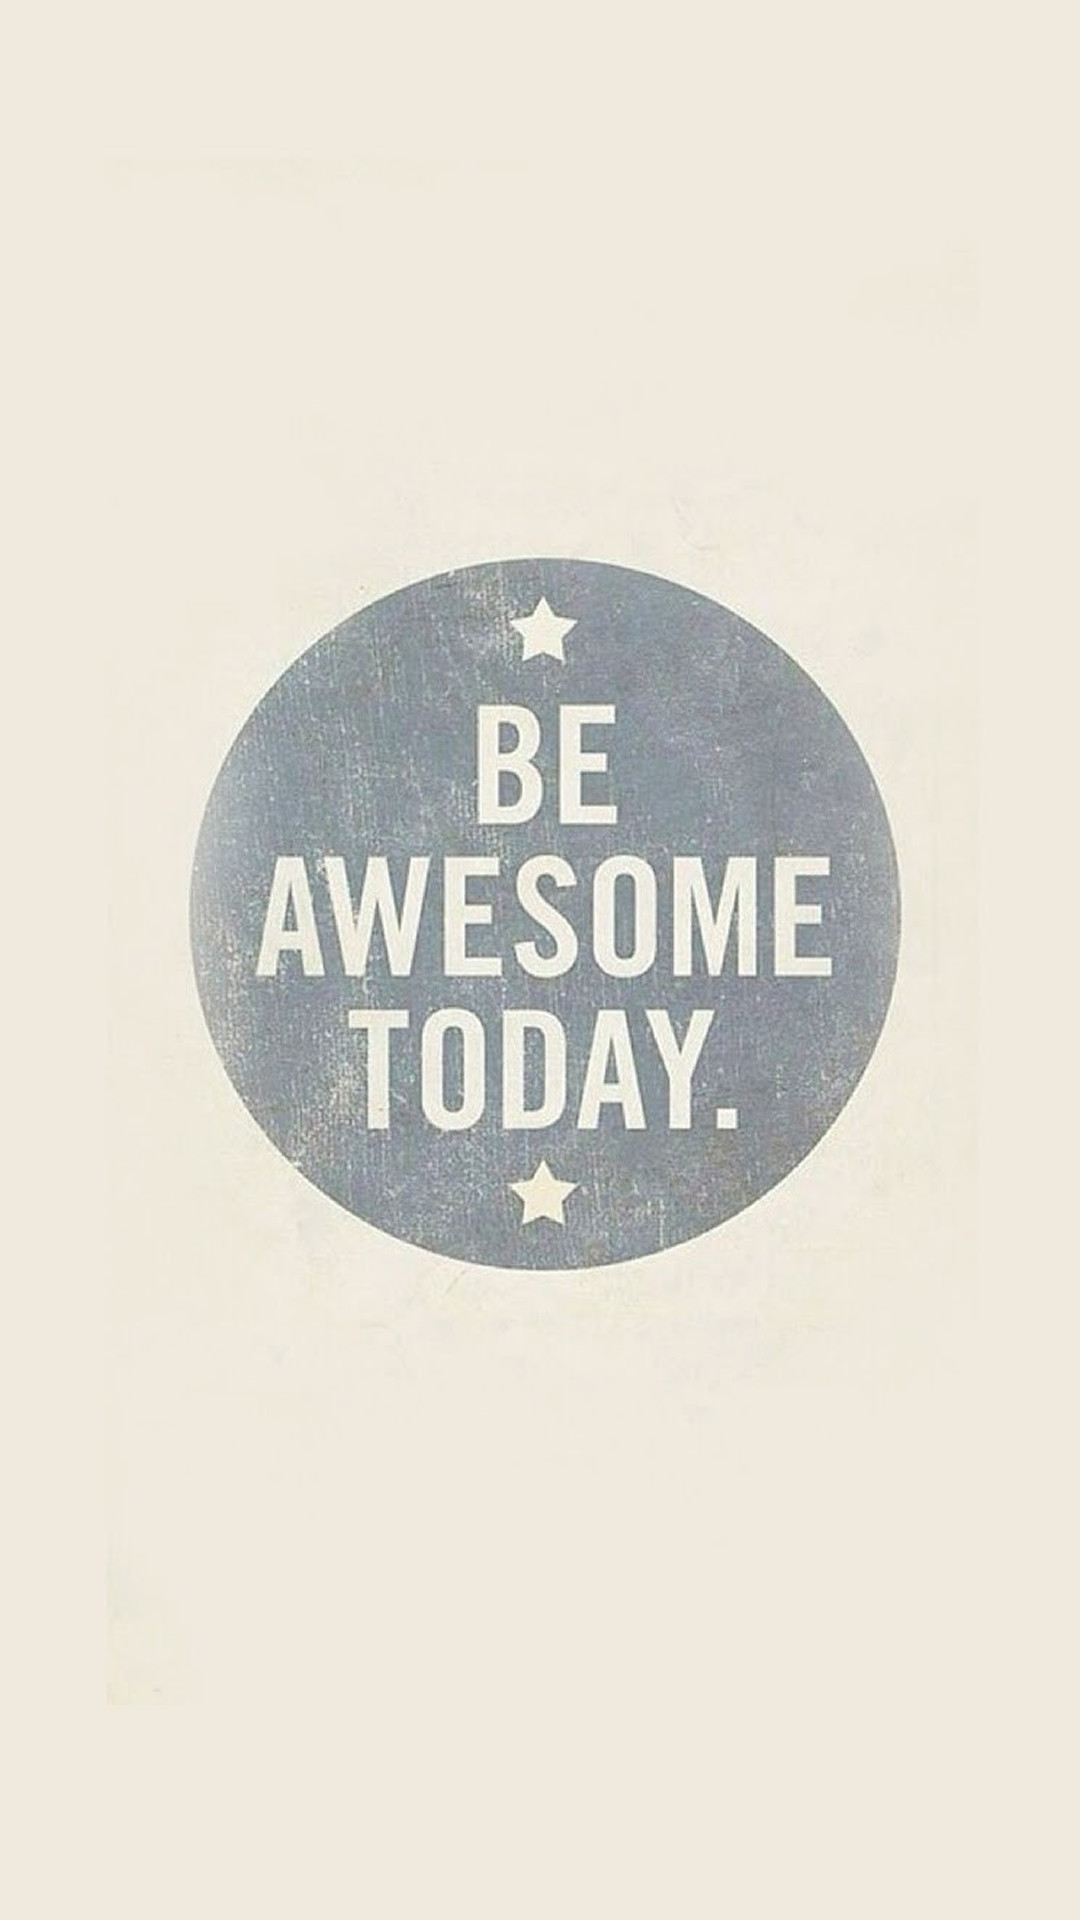 1080x1920 Be Awesome Today iPhone 6 Wallpaper Download | iPhone .